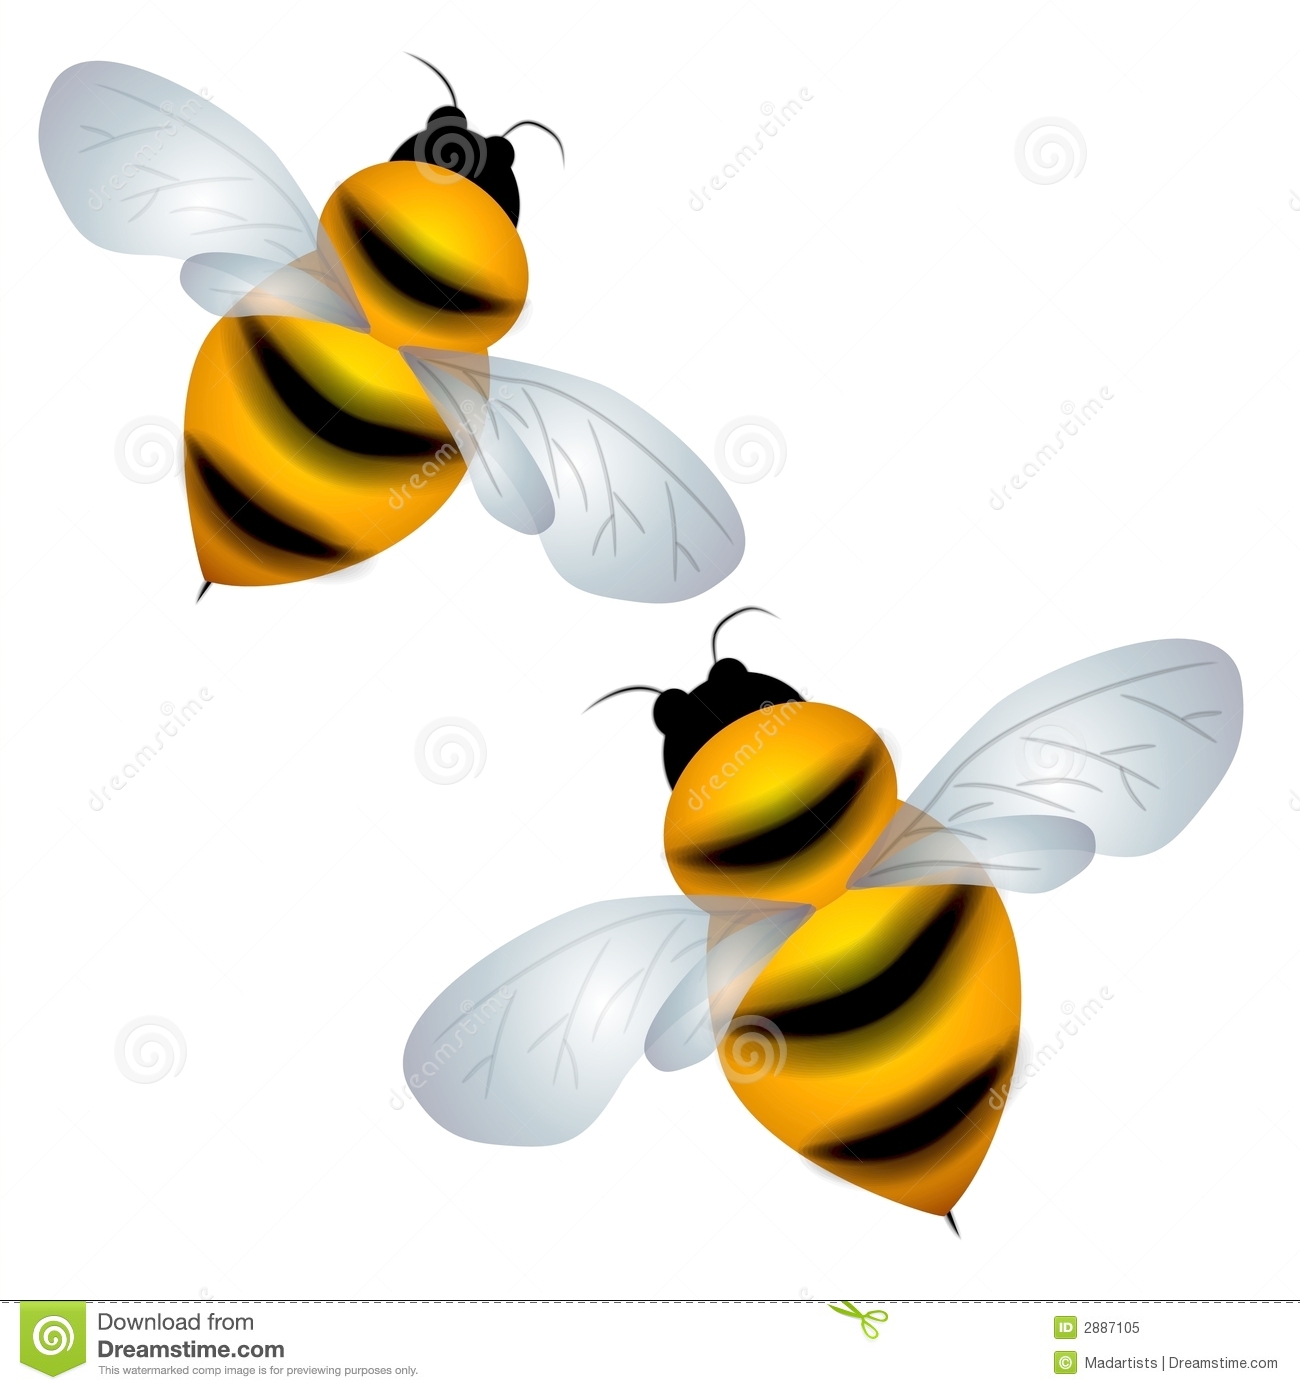 Bumble Bees On Flowers Clip Art Isolated Bumble Bees Flying